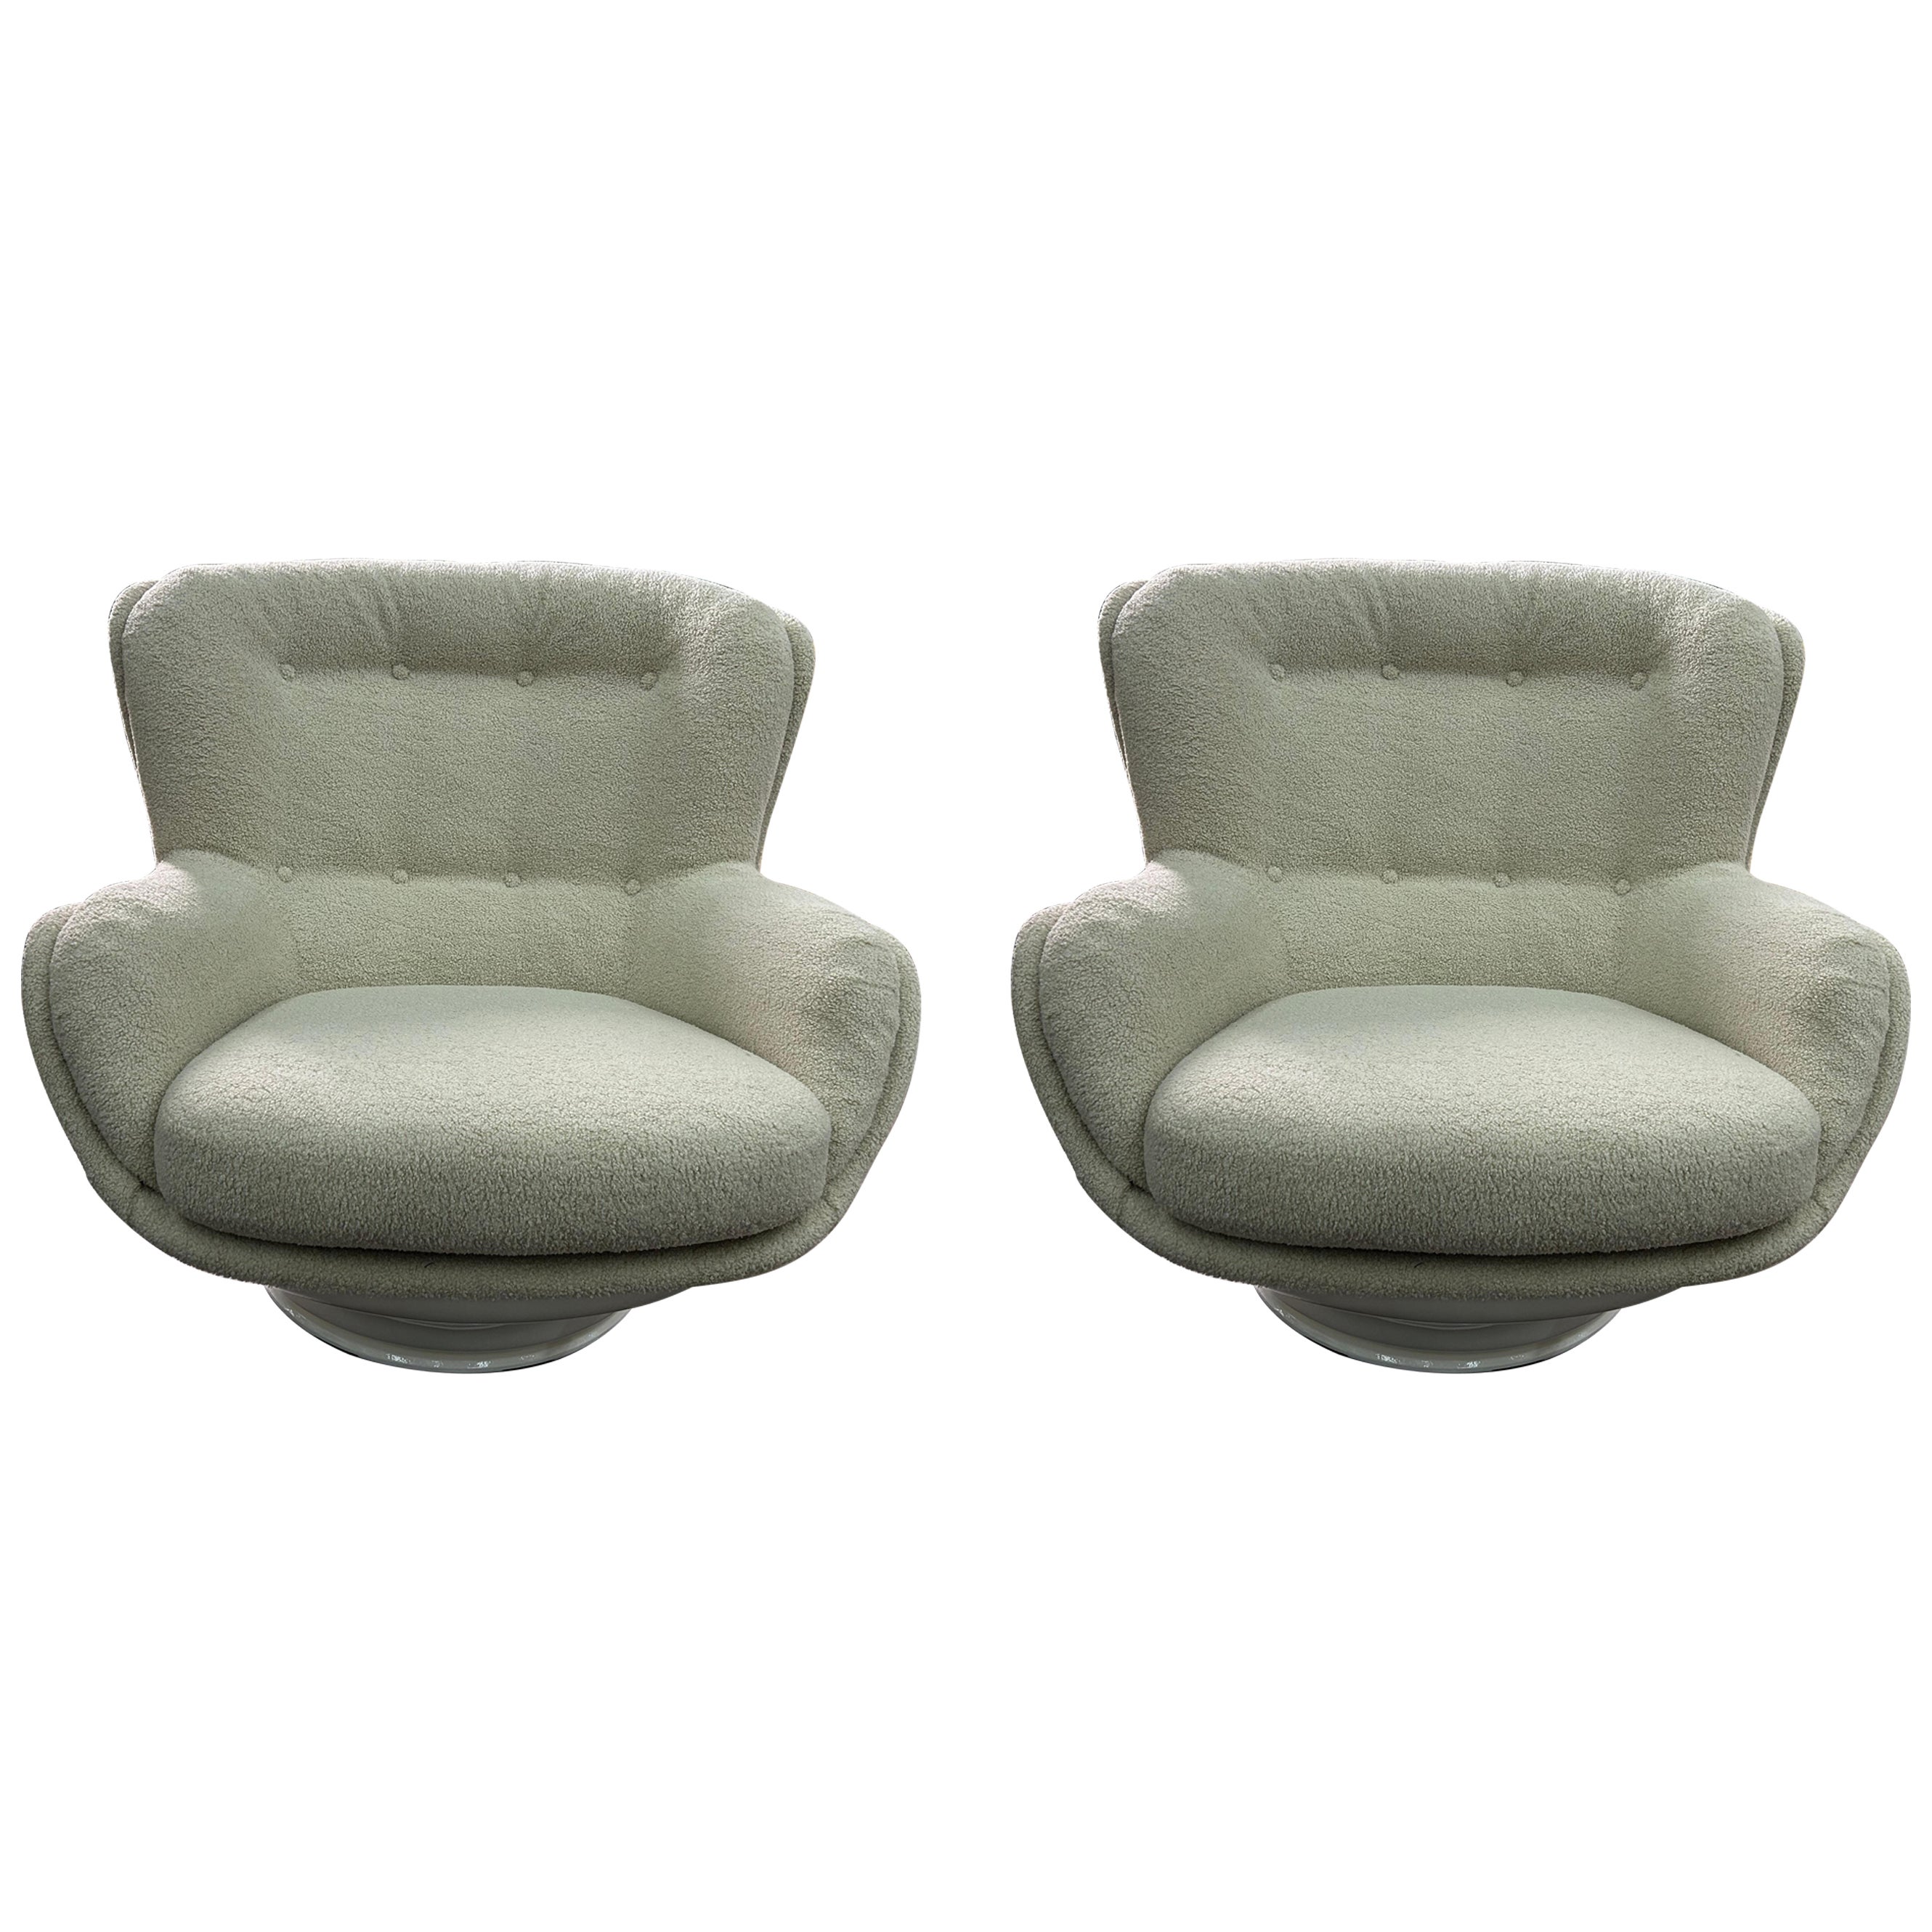 Airborne Lounge Chairs